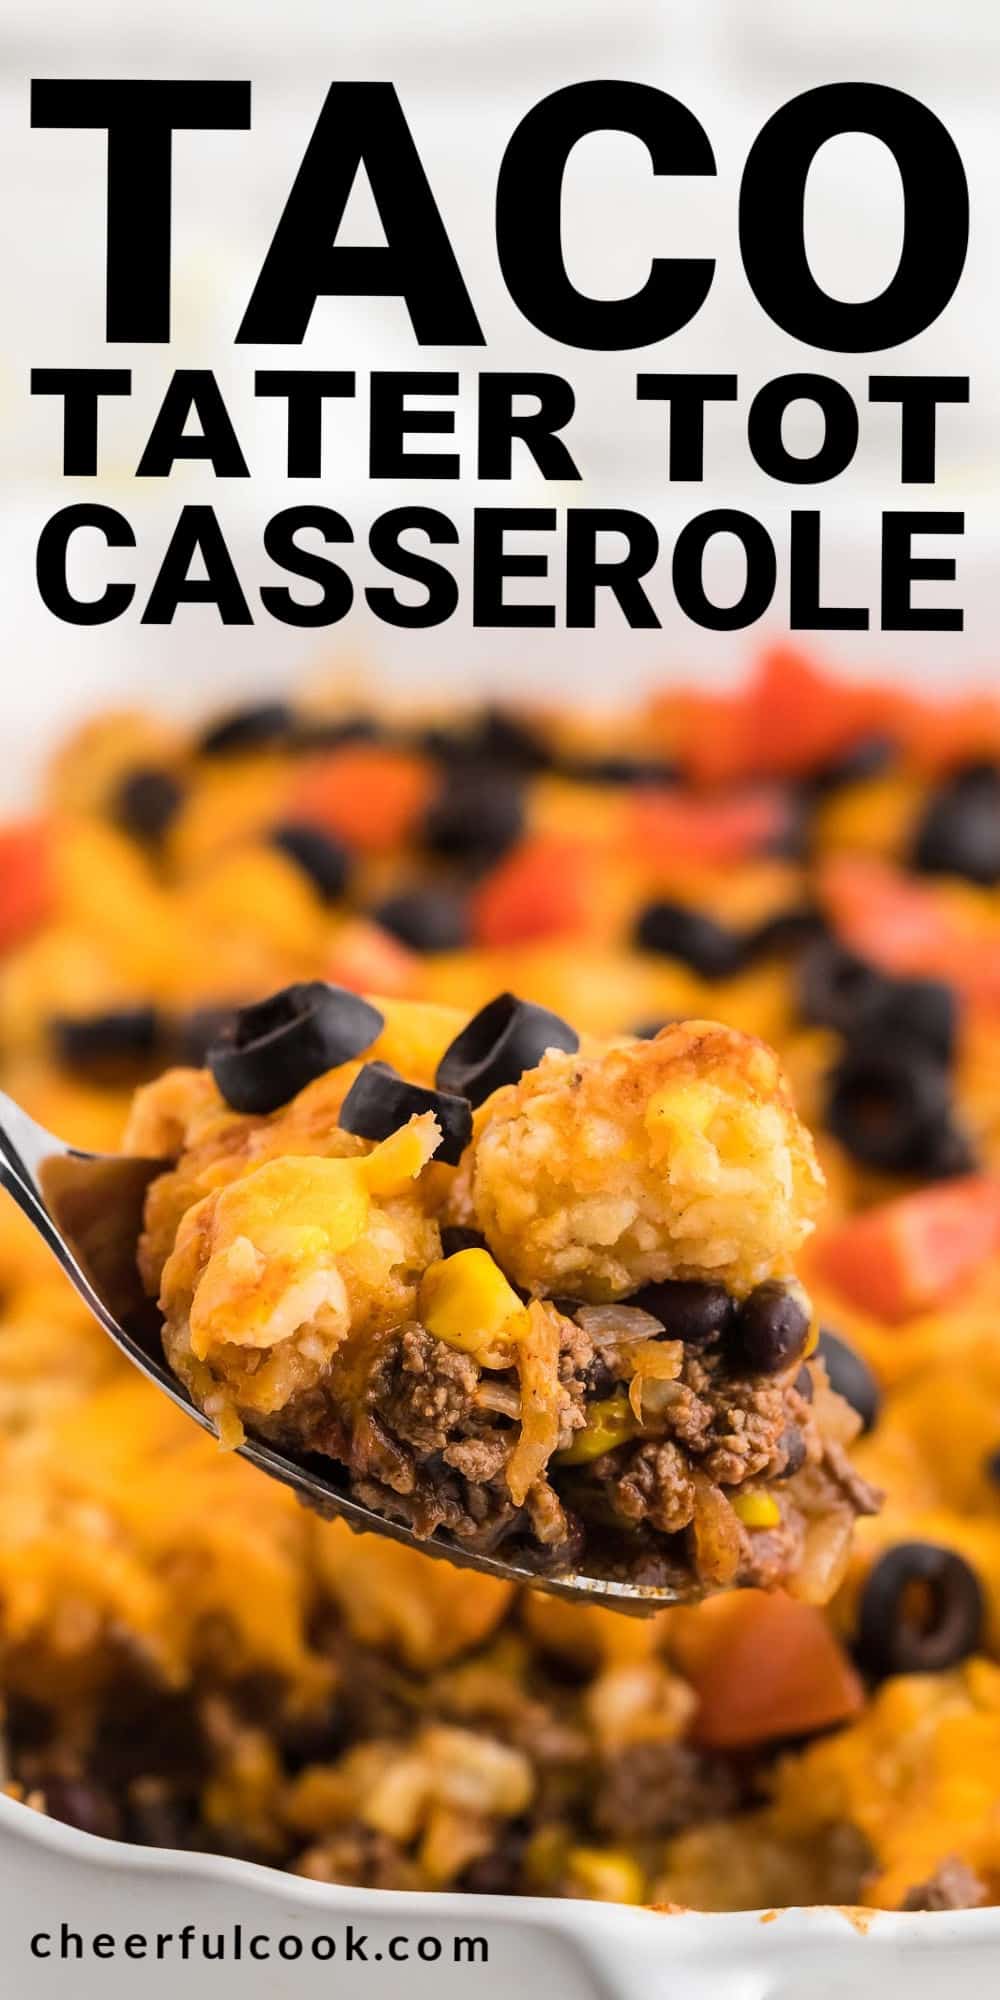 This Taco Tater Tot Casserole combines ground beef with classic Mexican flavors and is topped with yummy cheese. Perfect for all year long, but especially for Cinco De Mayo. Simple Taco Tater Tot Casserole Recipe | Oven Baked Tater Tot Beef Casserole #cheerfulcook #casserole #beef #recipe #tatertot via @cheerfulcook